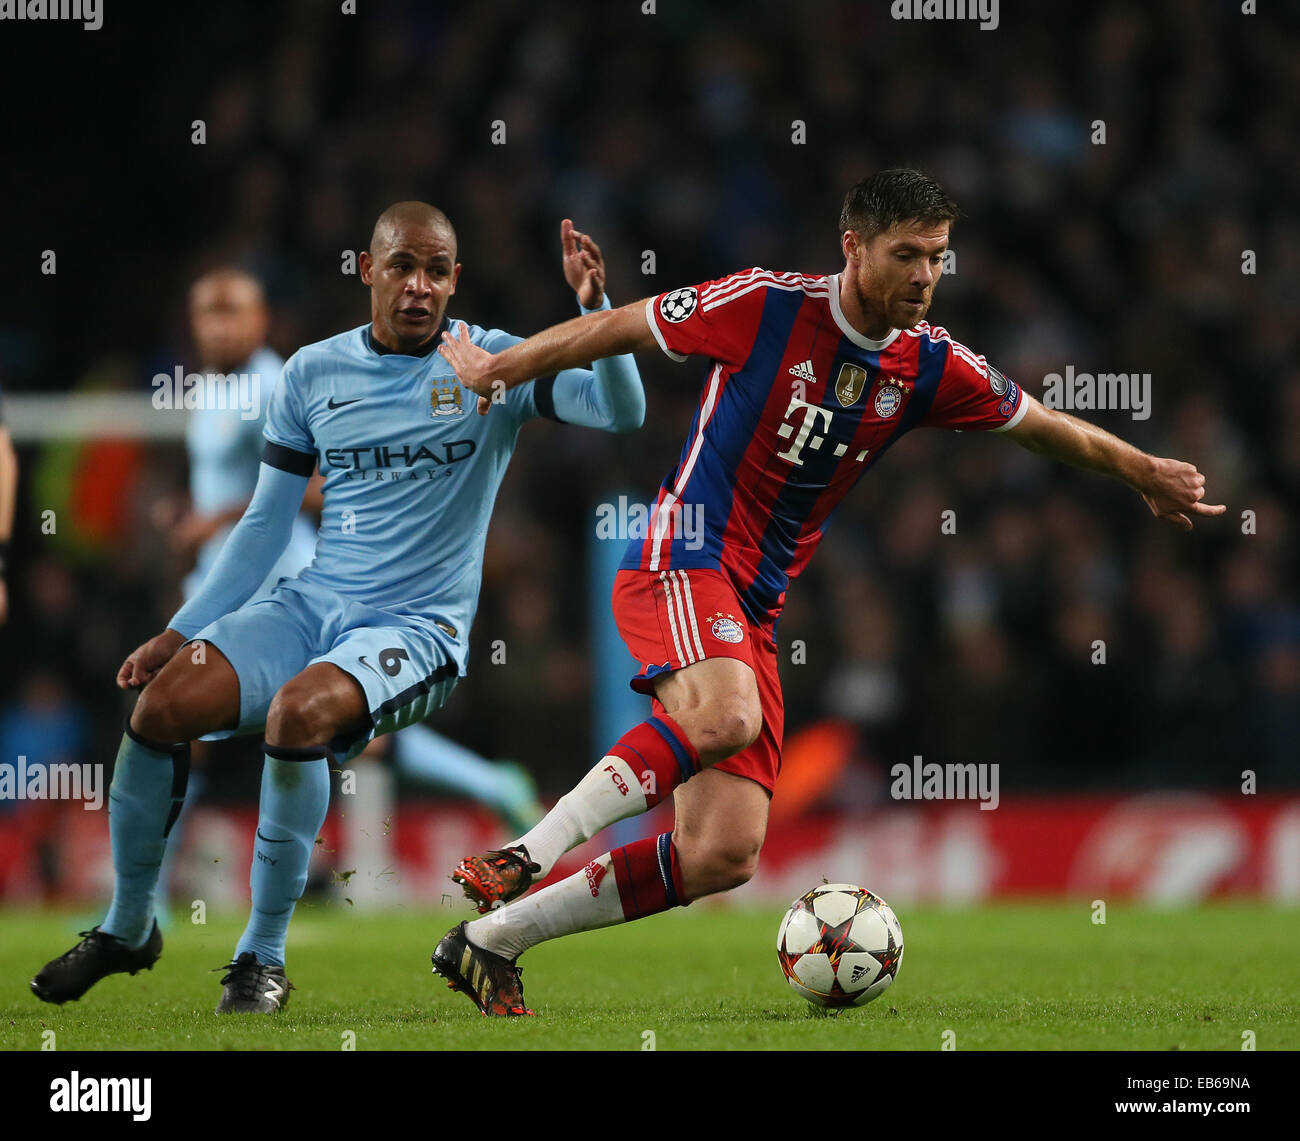 Nov. 25, 2014 - Manchester, United Kingdom - Fernando of Manchester City and Xabi Alonso of Bayern Munich - UEFA Champions League group E - Manchester City vs Bayern Munich - Etihad Stadium - Manchester - England - 25rd November 2014 - Picture Simon Bellis/Sportimage. Stock Photo